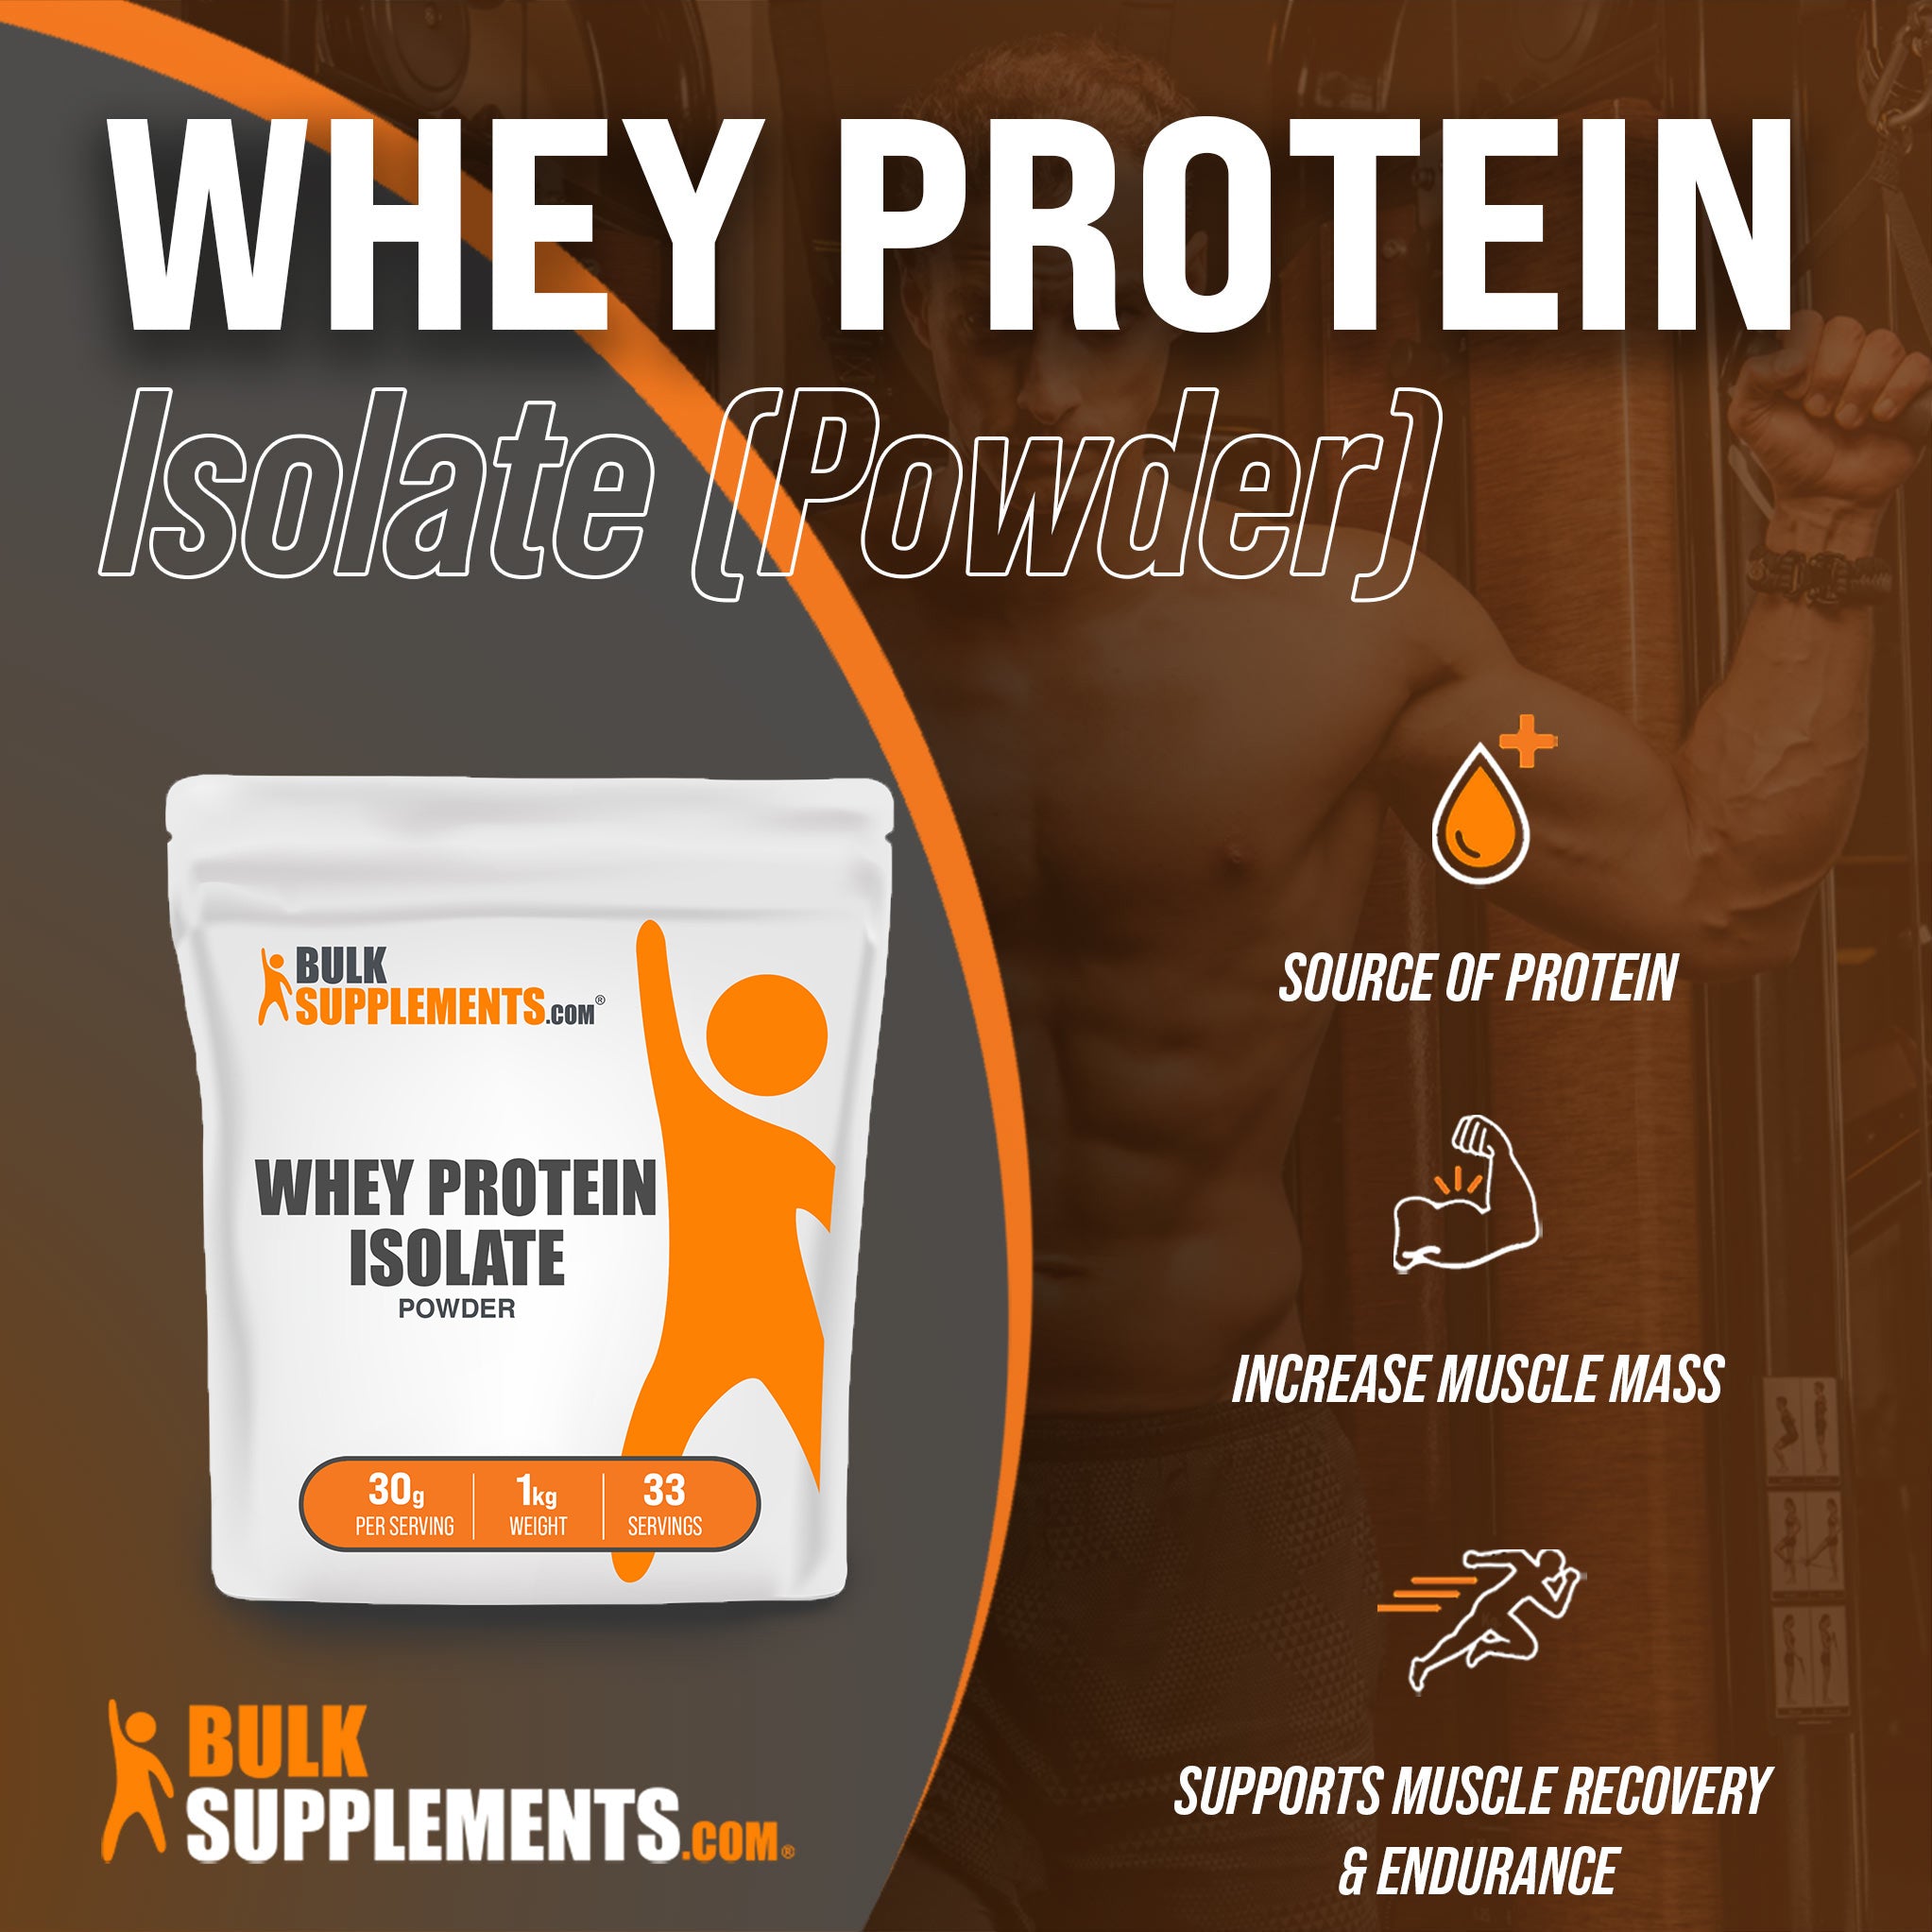 Whey Protein Isolate from Bulk Supplements for protein and muscle mass